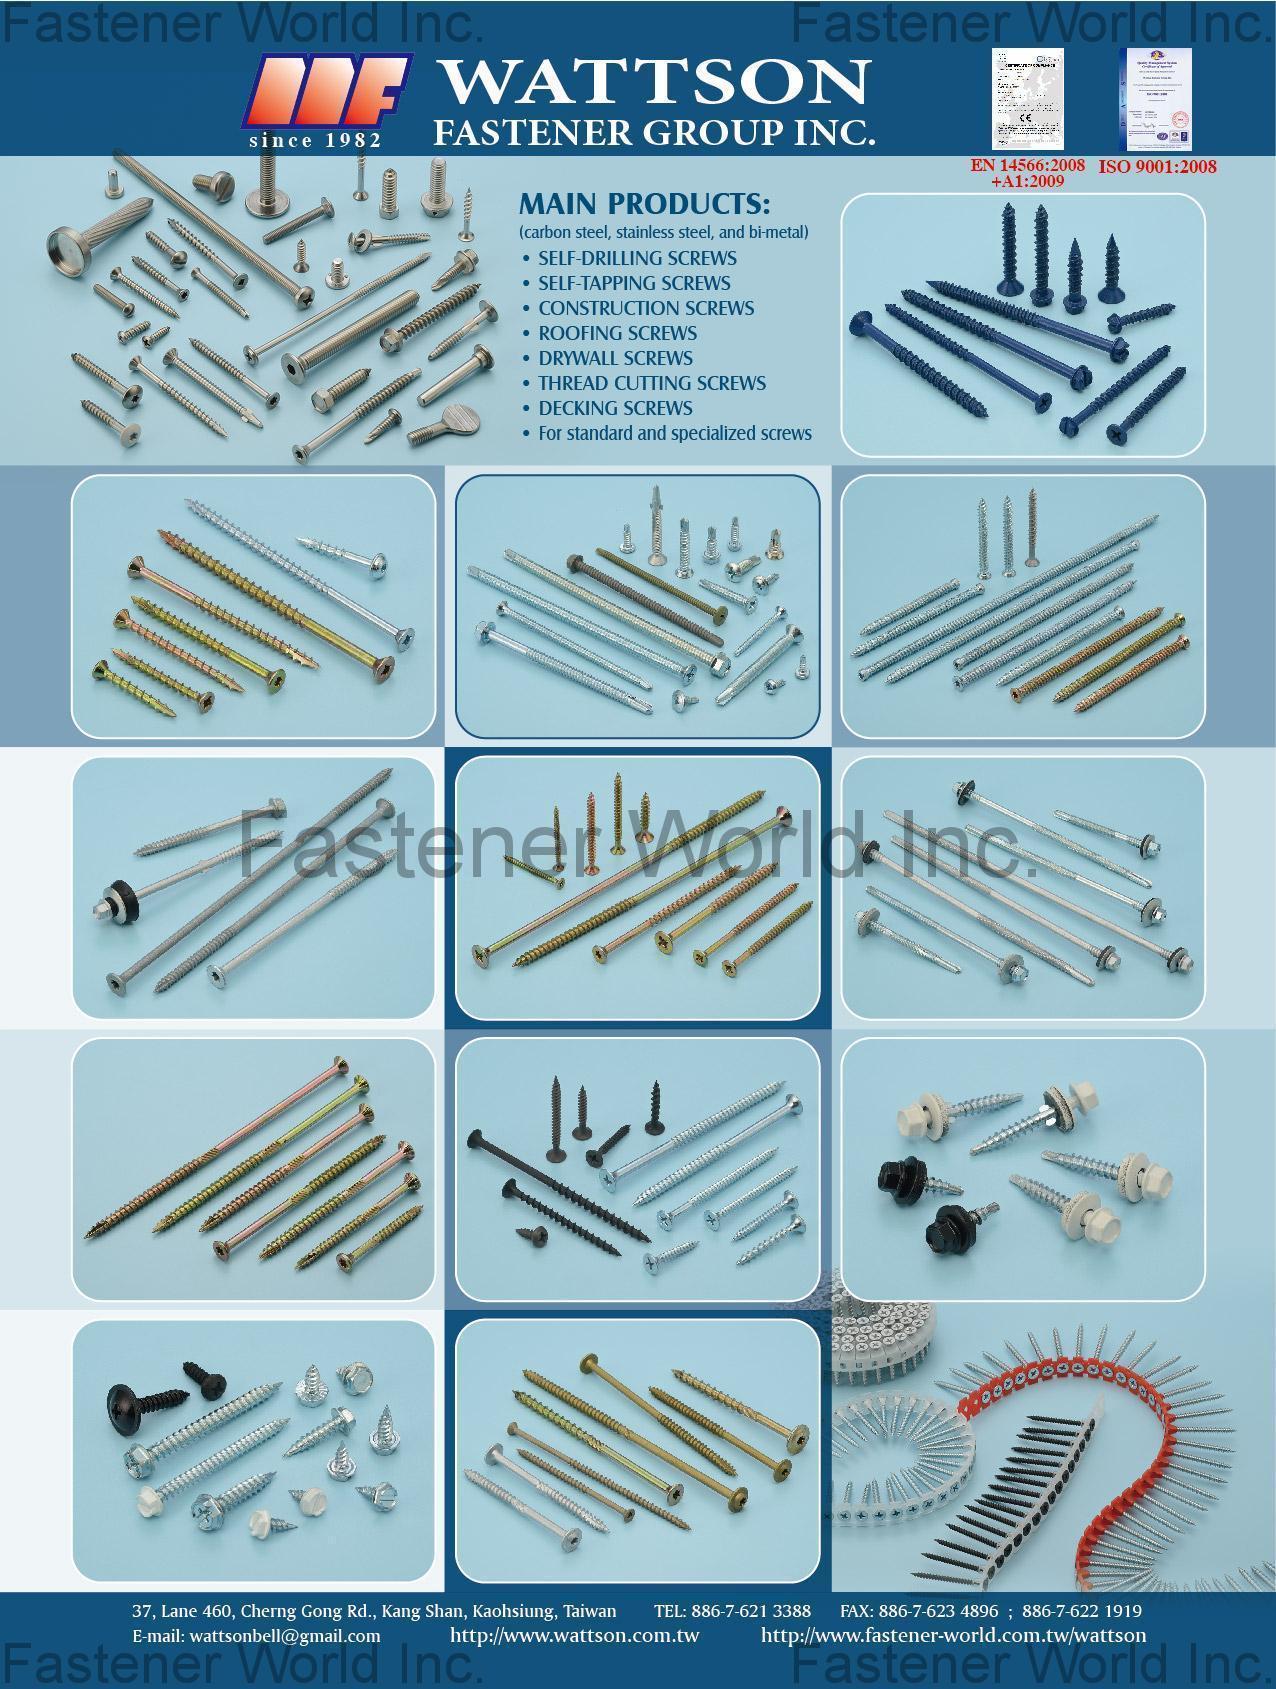 WATTSON FASTENER GROUP INC.  , Self-Drilling Screw, Self-Tapping Screw, Construction Screw, Roofing Screw, Drywall Screw, Thread Cutting Screw, Decking Screw,For Standard And Specialized Screw , Construction Fasteners